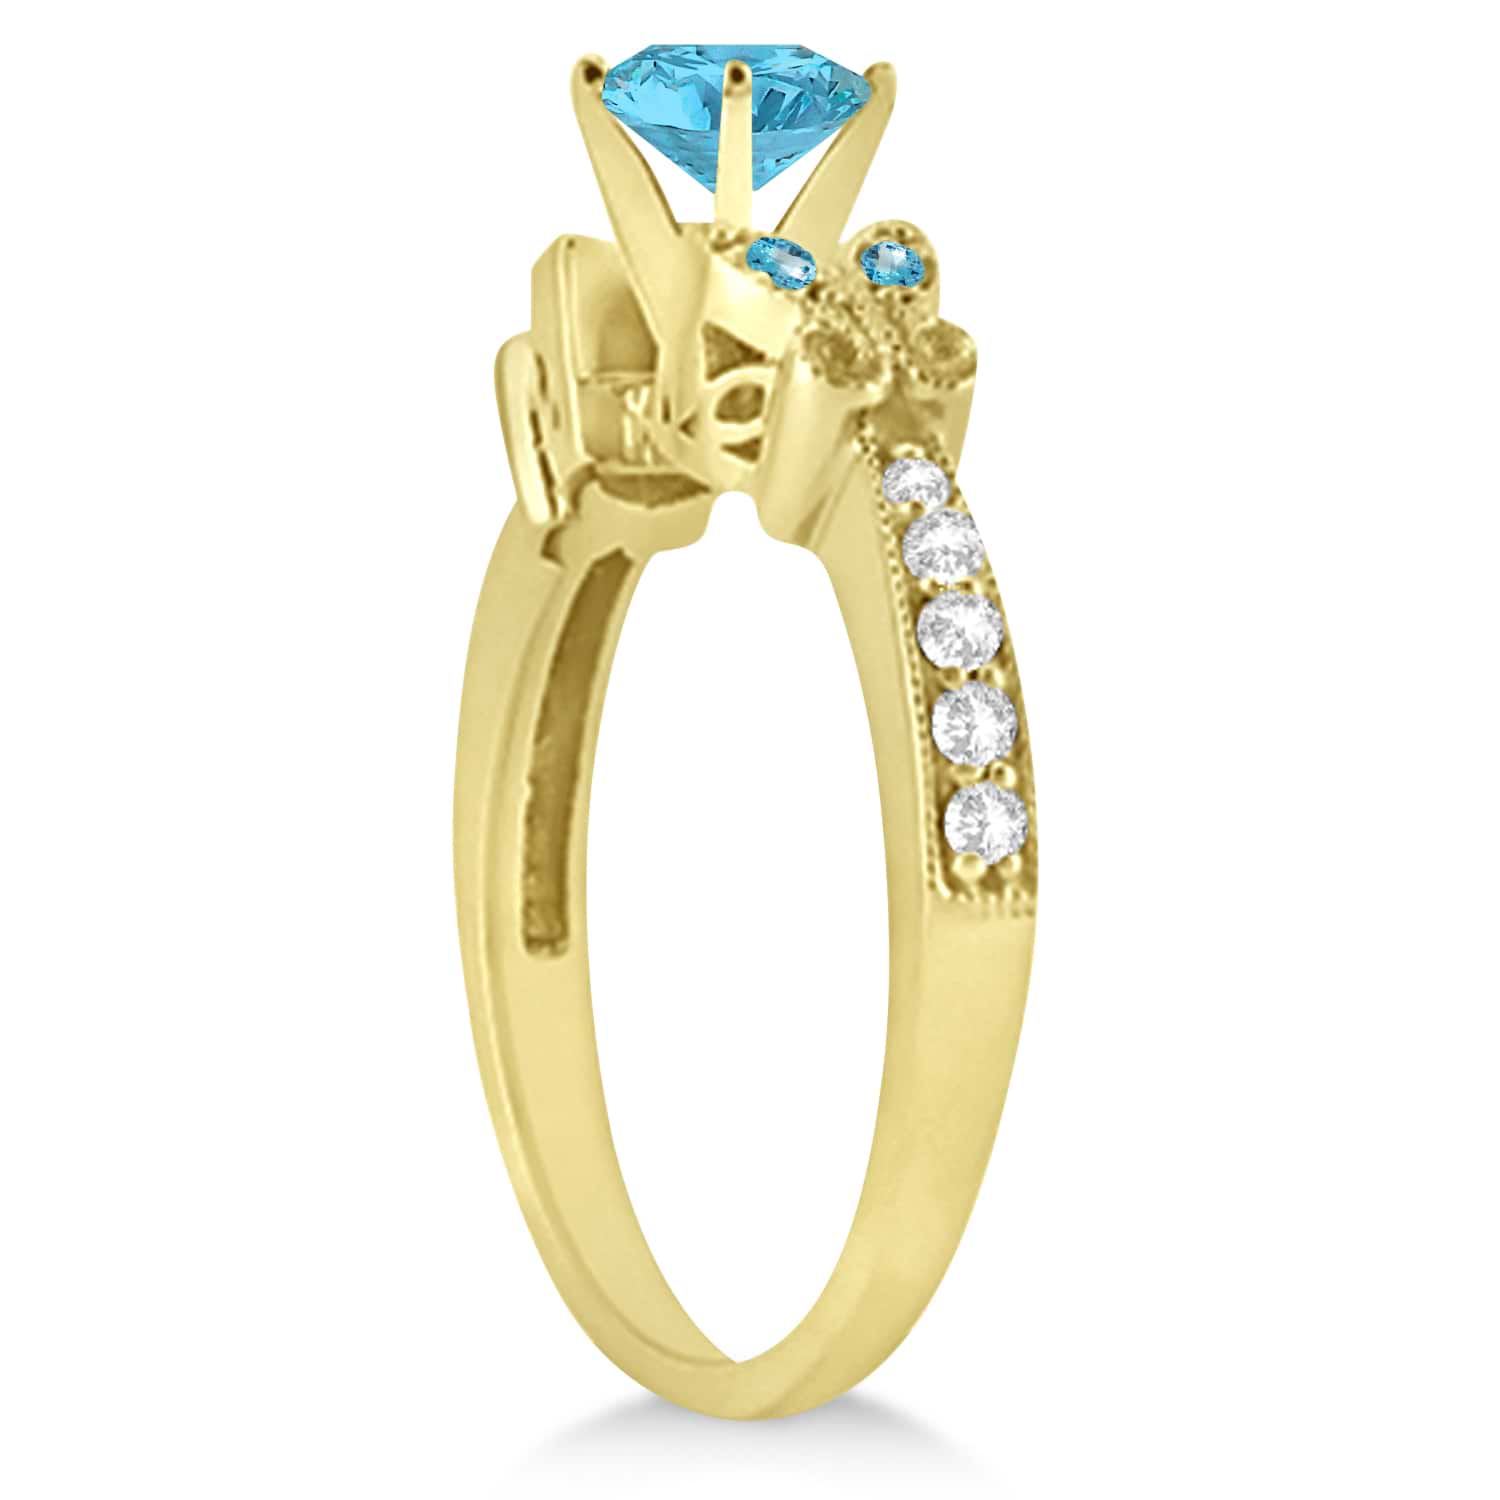 Butterfly Blue Topaz & Diamond Engagement Ring 14k Yellow Gold (1.78ct)